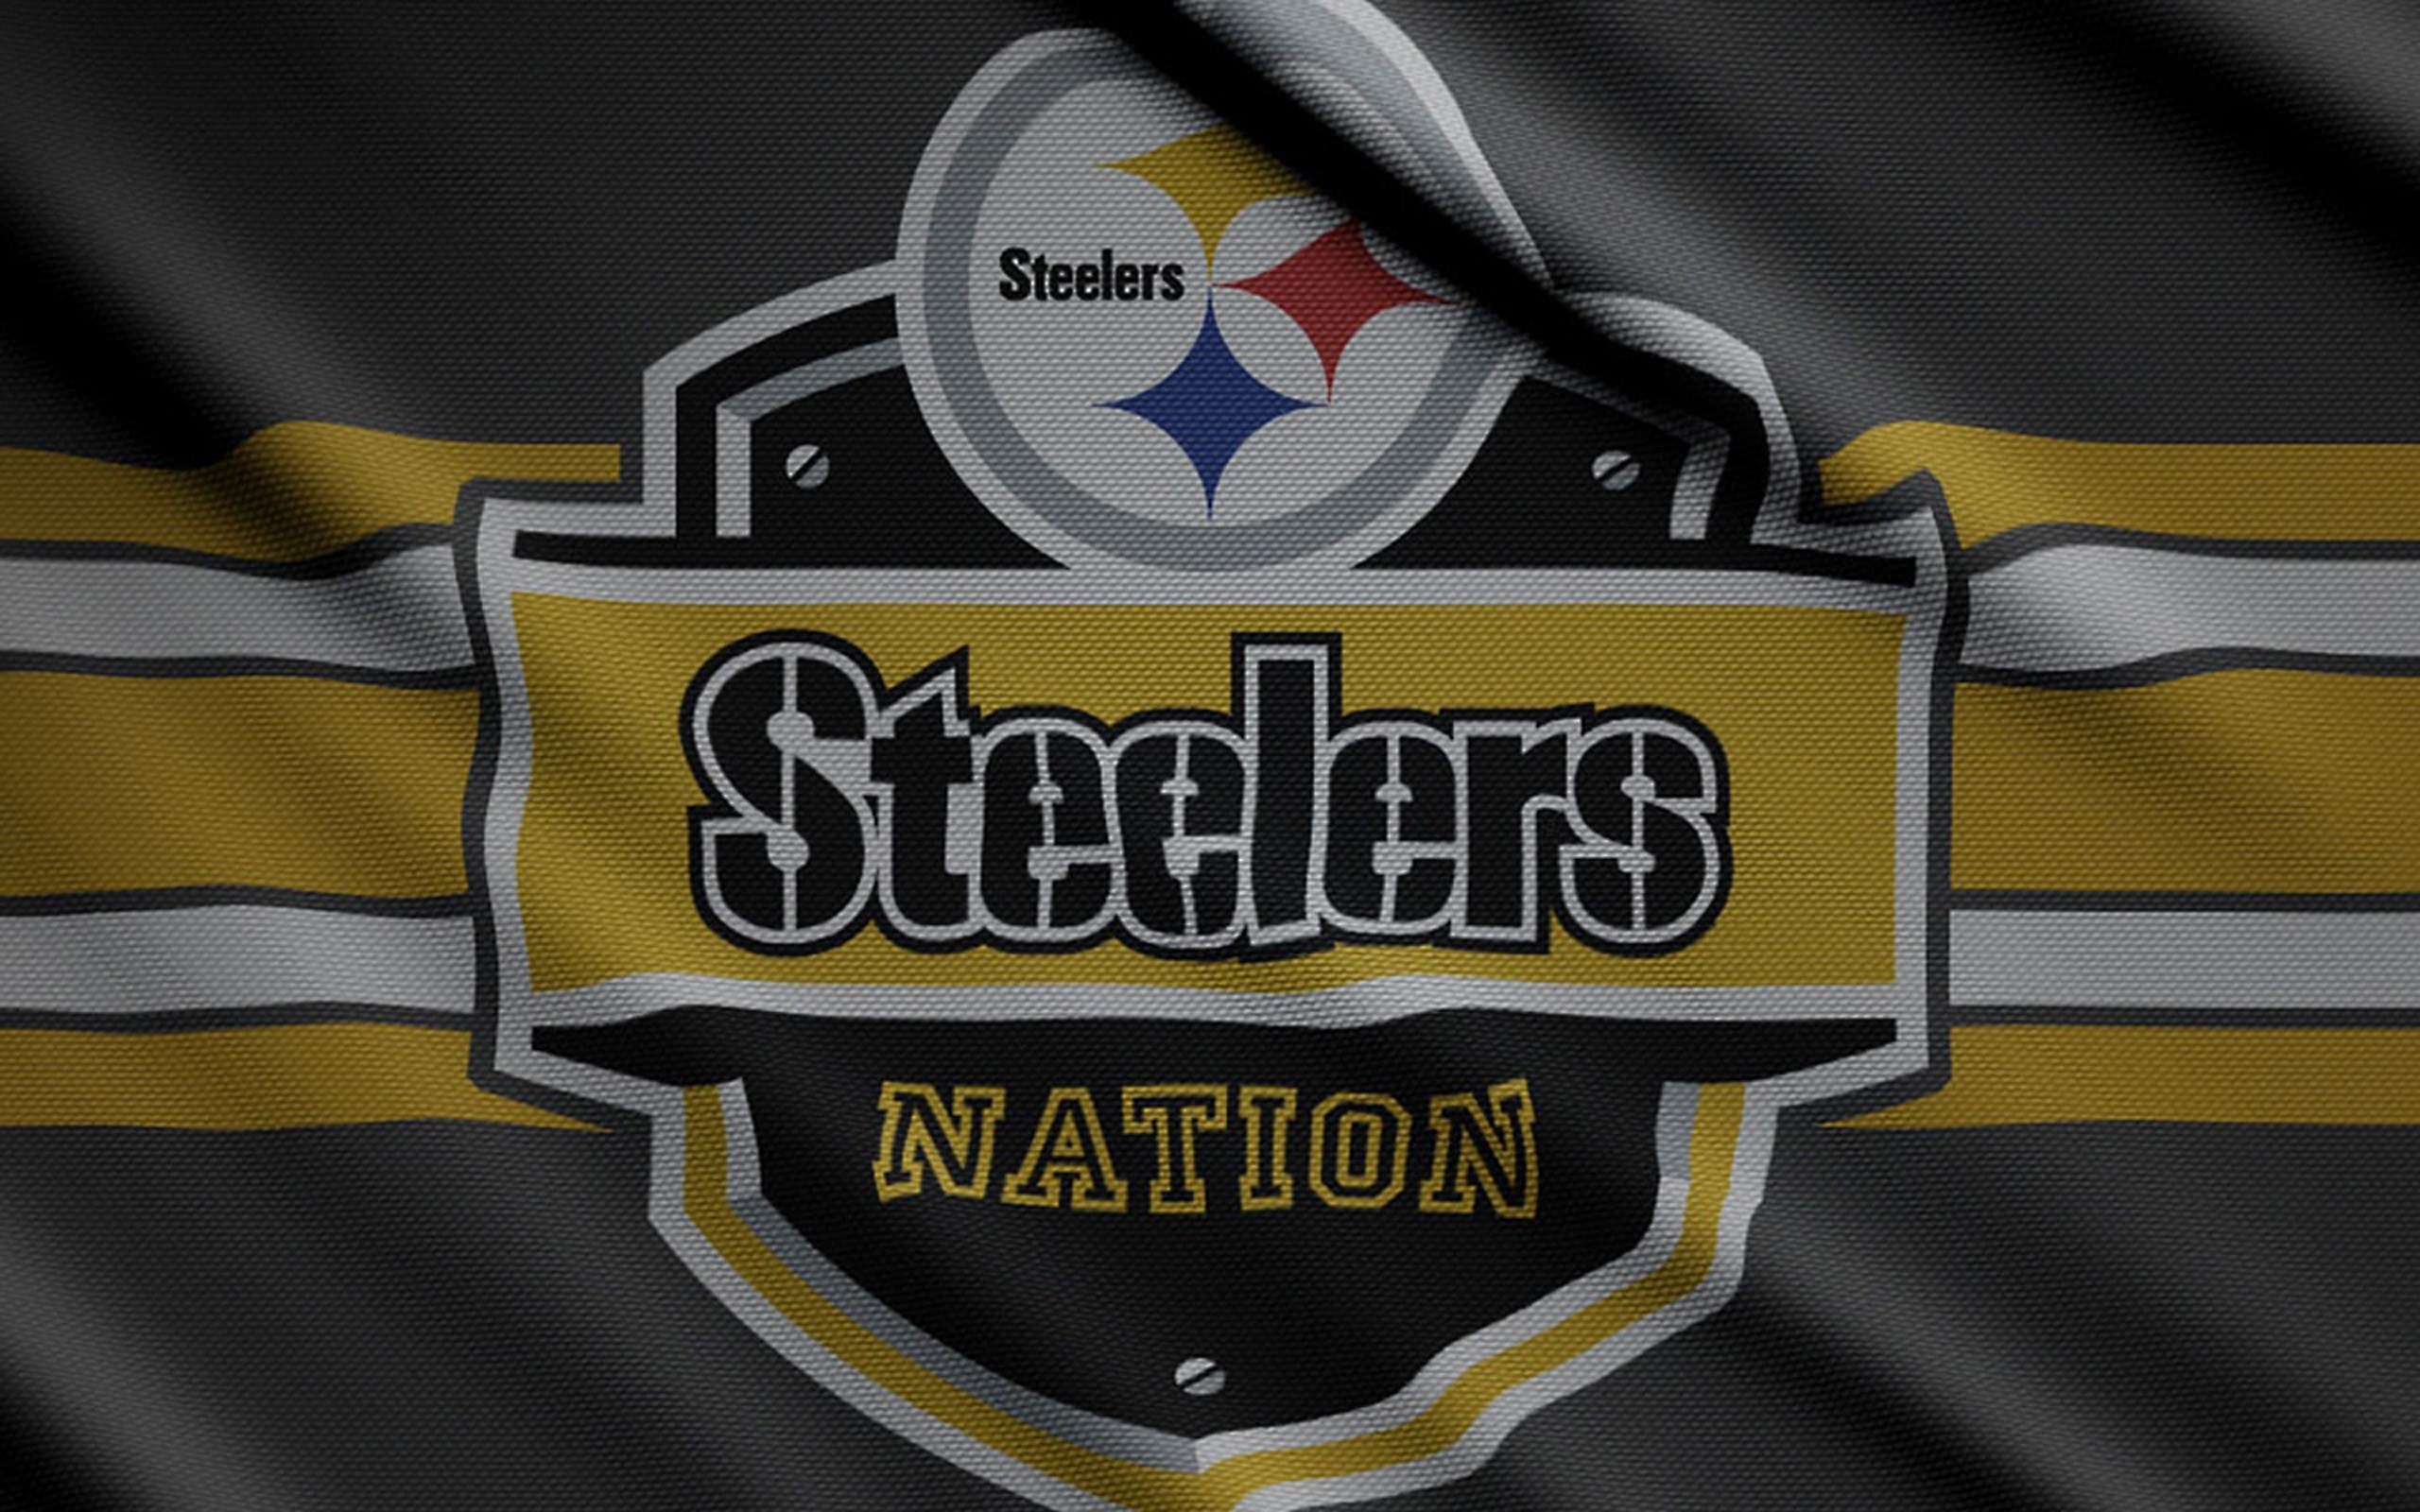 2560x1600 backgrounds pittsburgh steelers wallpaper hd | sharovarka | Pinterest |  Pittsburgh steelers wallpaper